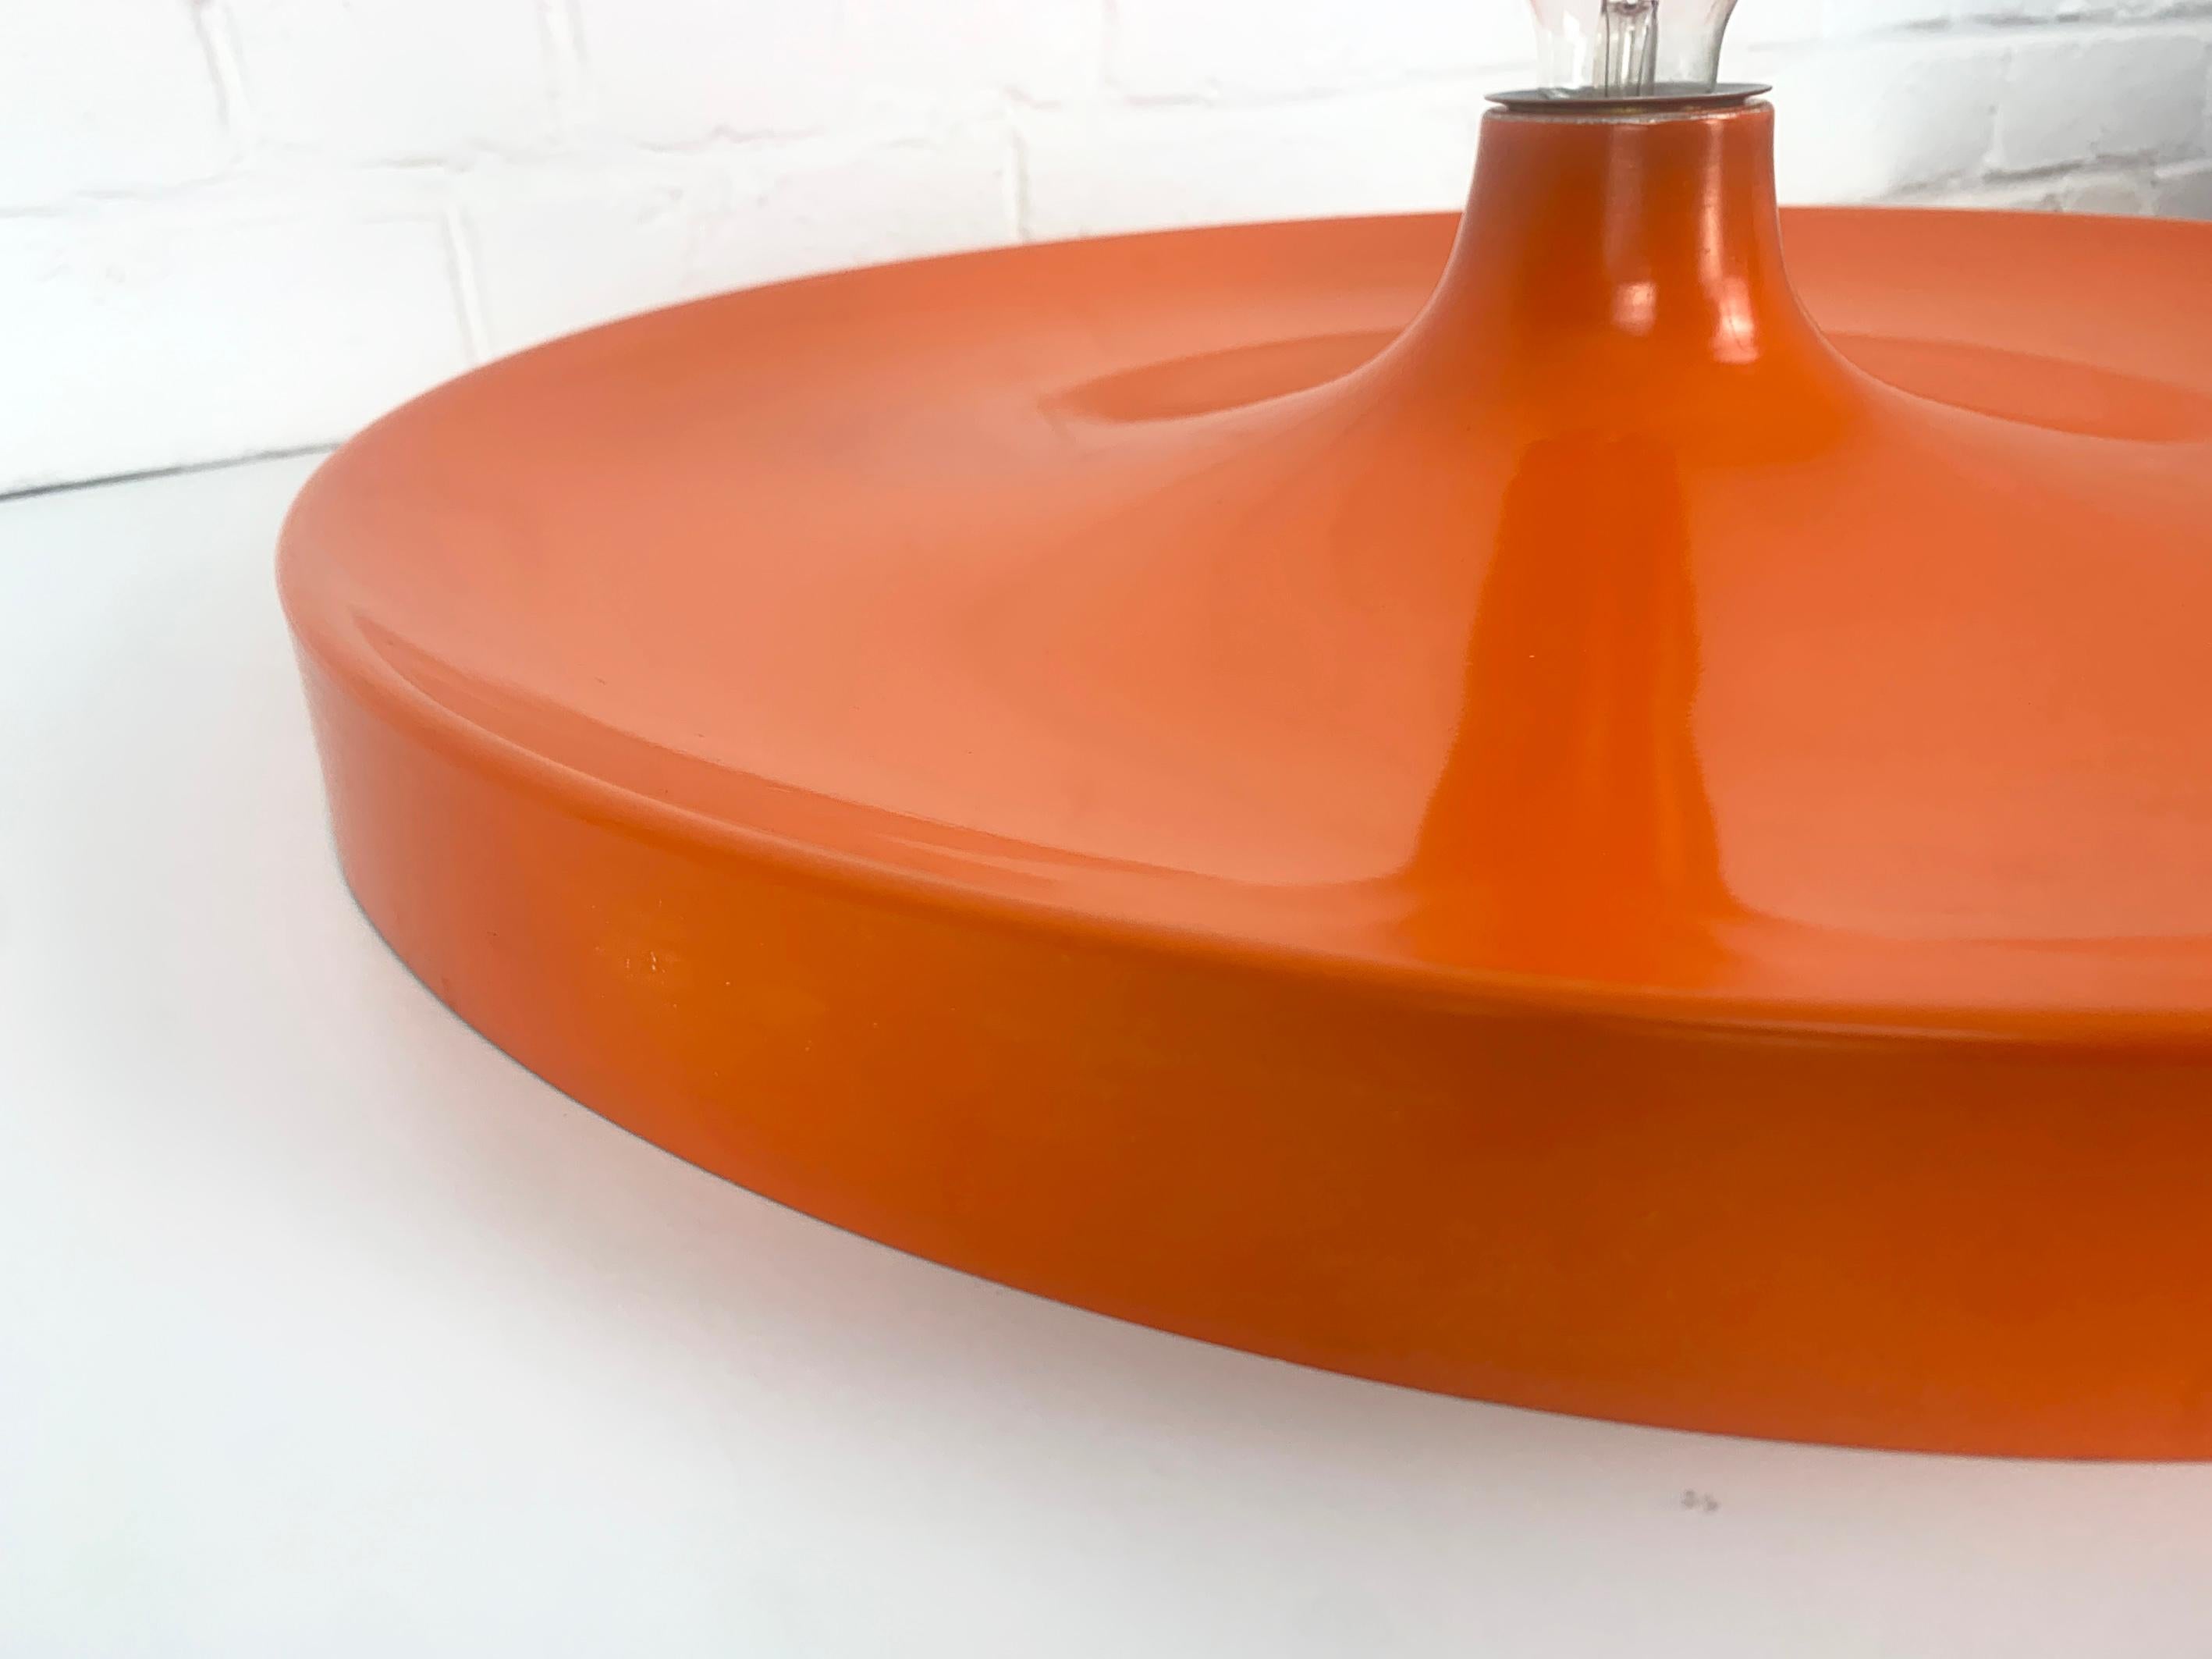 Large Charlotte Perriand Space Age Flush Sconce Disc Wall Light, Germany, 1960s For Sale 3